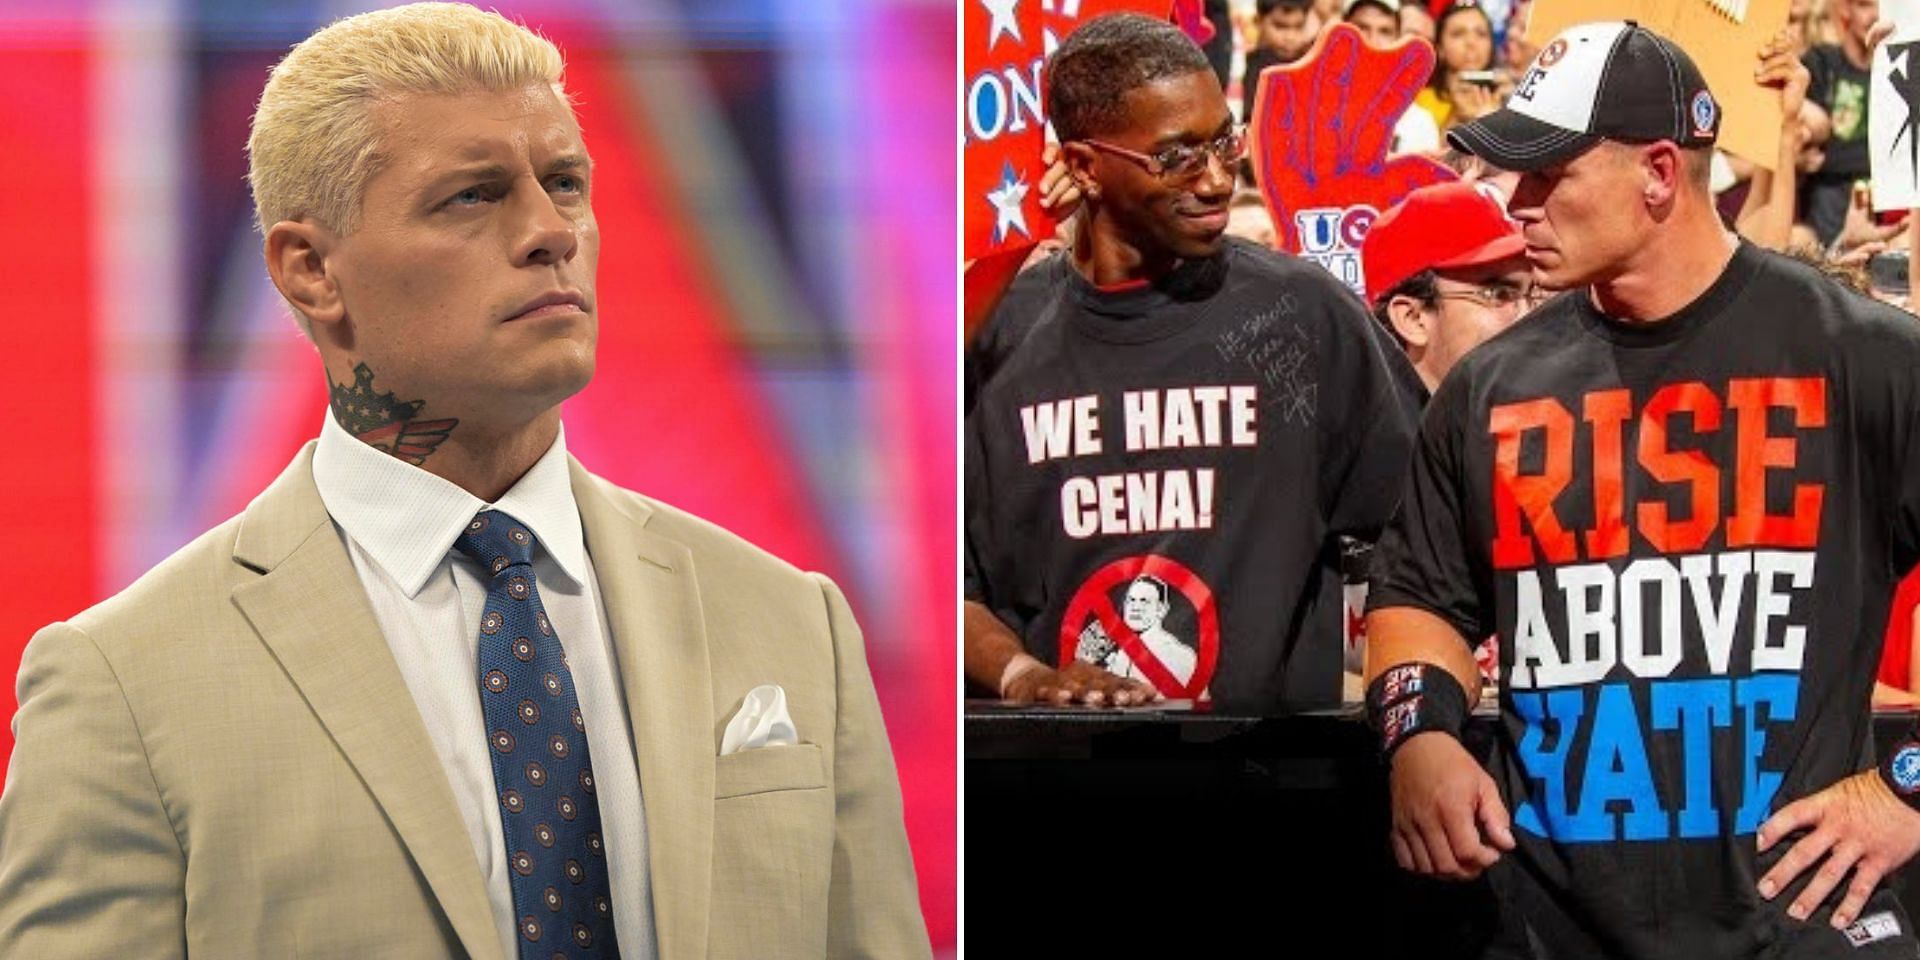 Cody Rhodes shares his thoughts on John Cena remaining a babyface